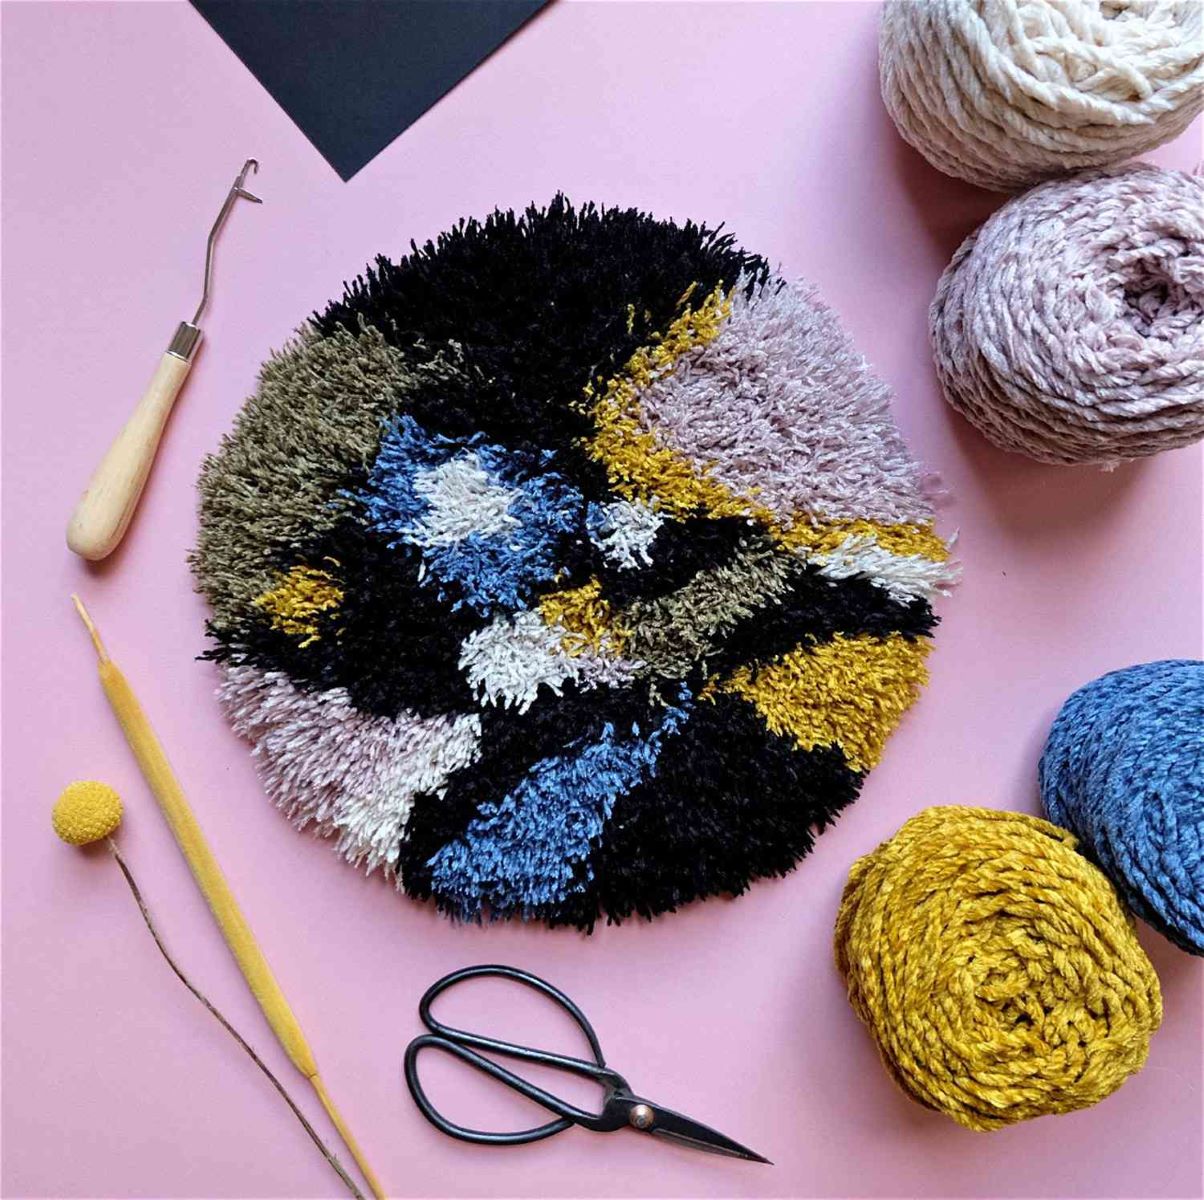 How To Make Latch Hook Rugs | Storables